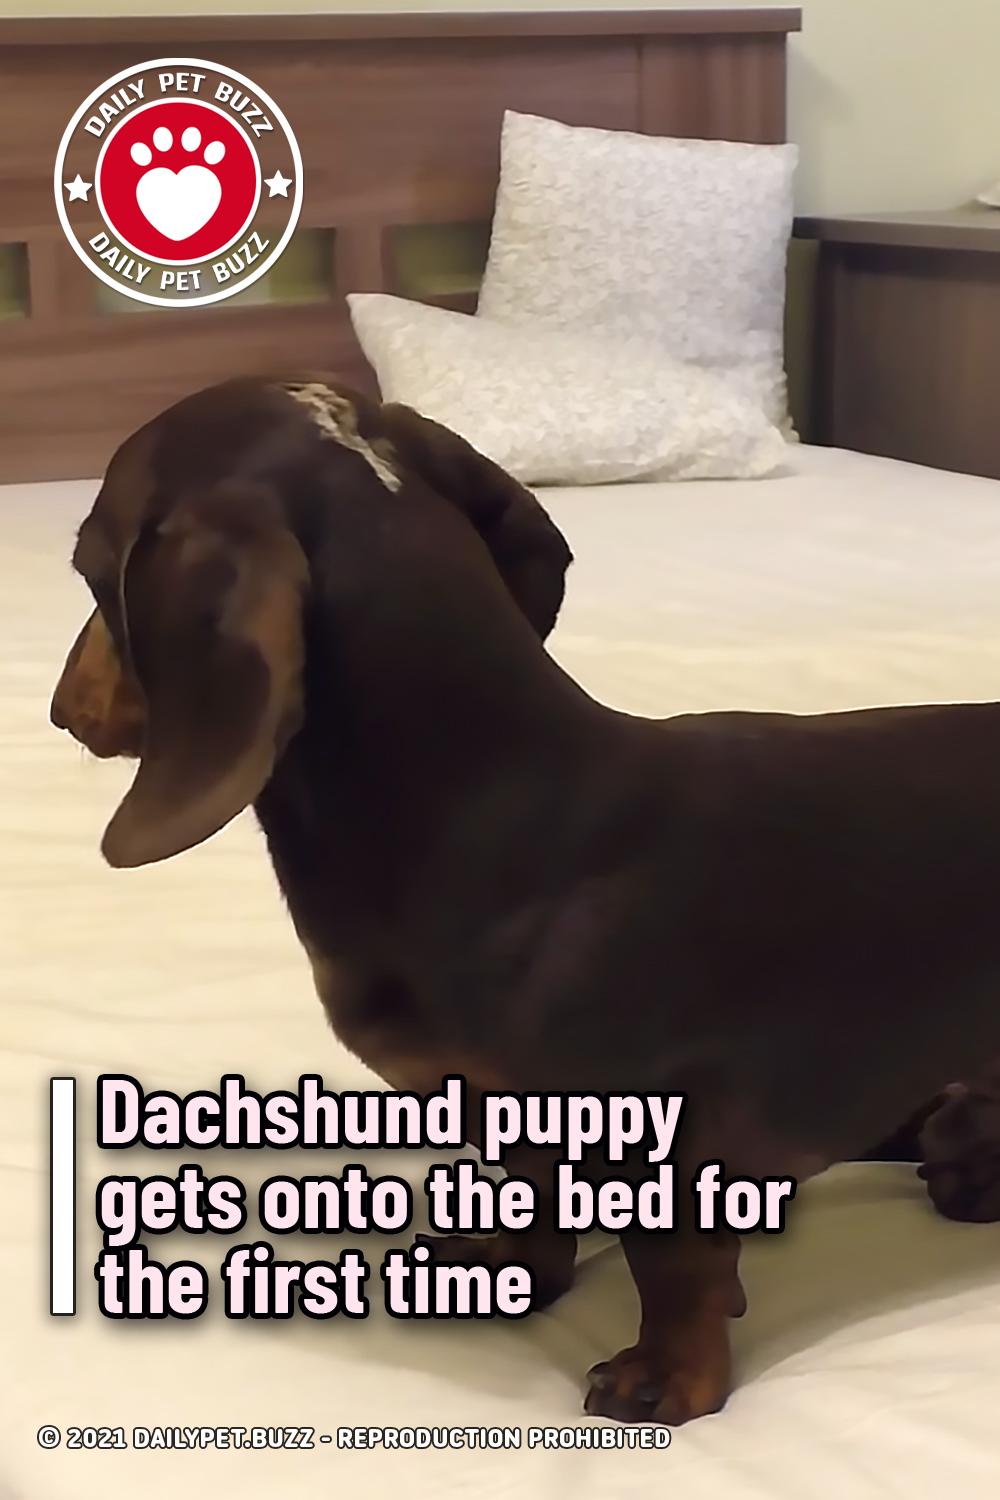 Dachshund puppy gets onto the bed for the first time